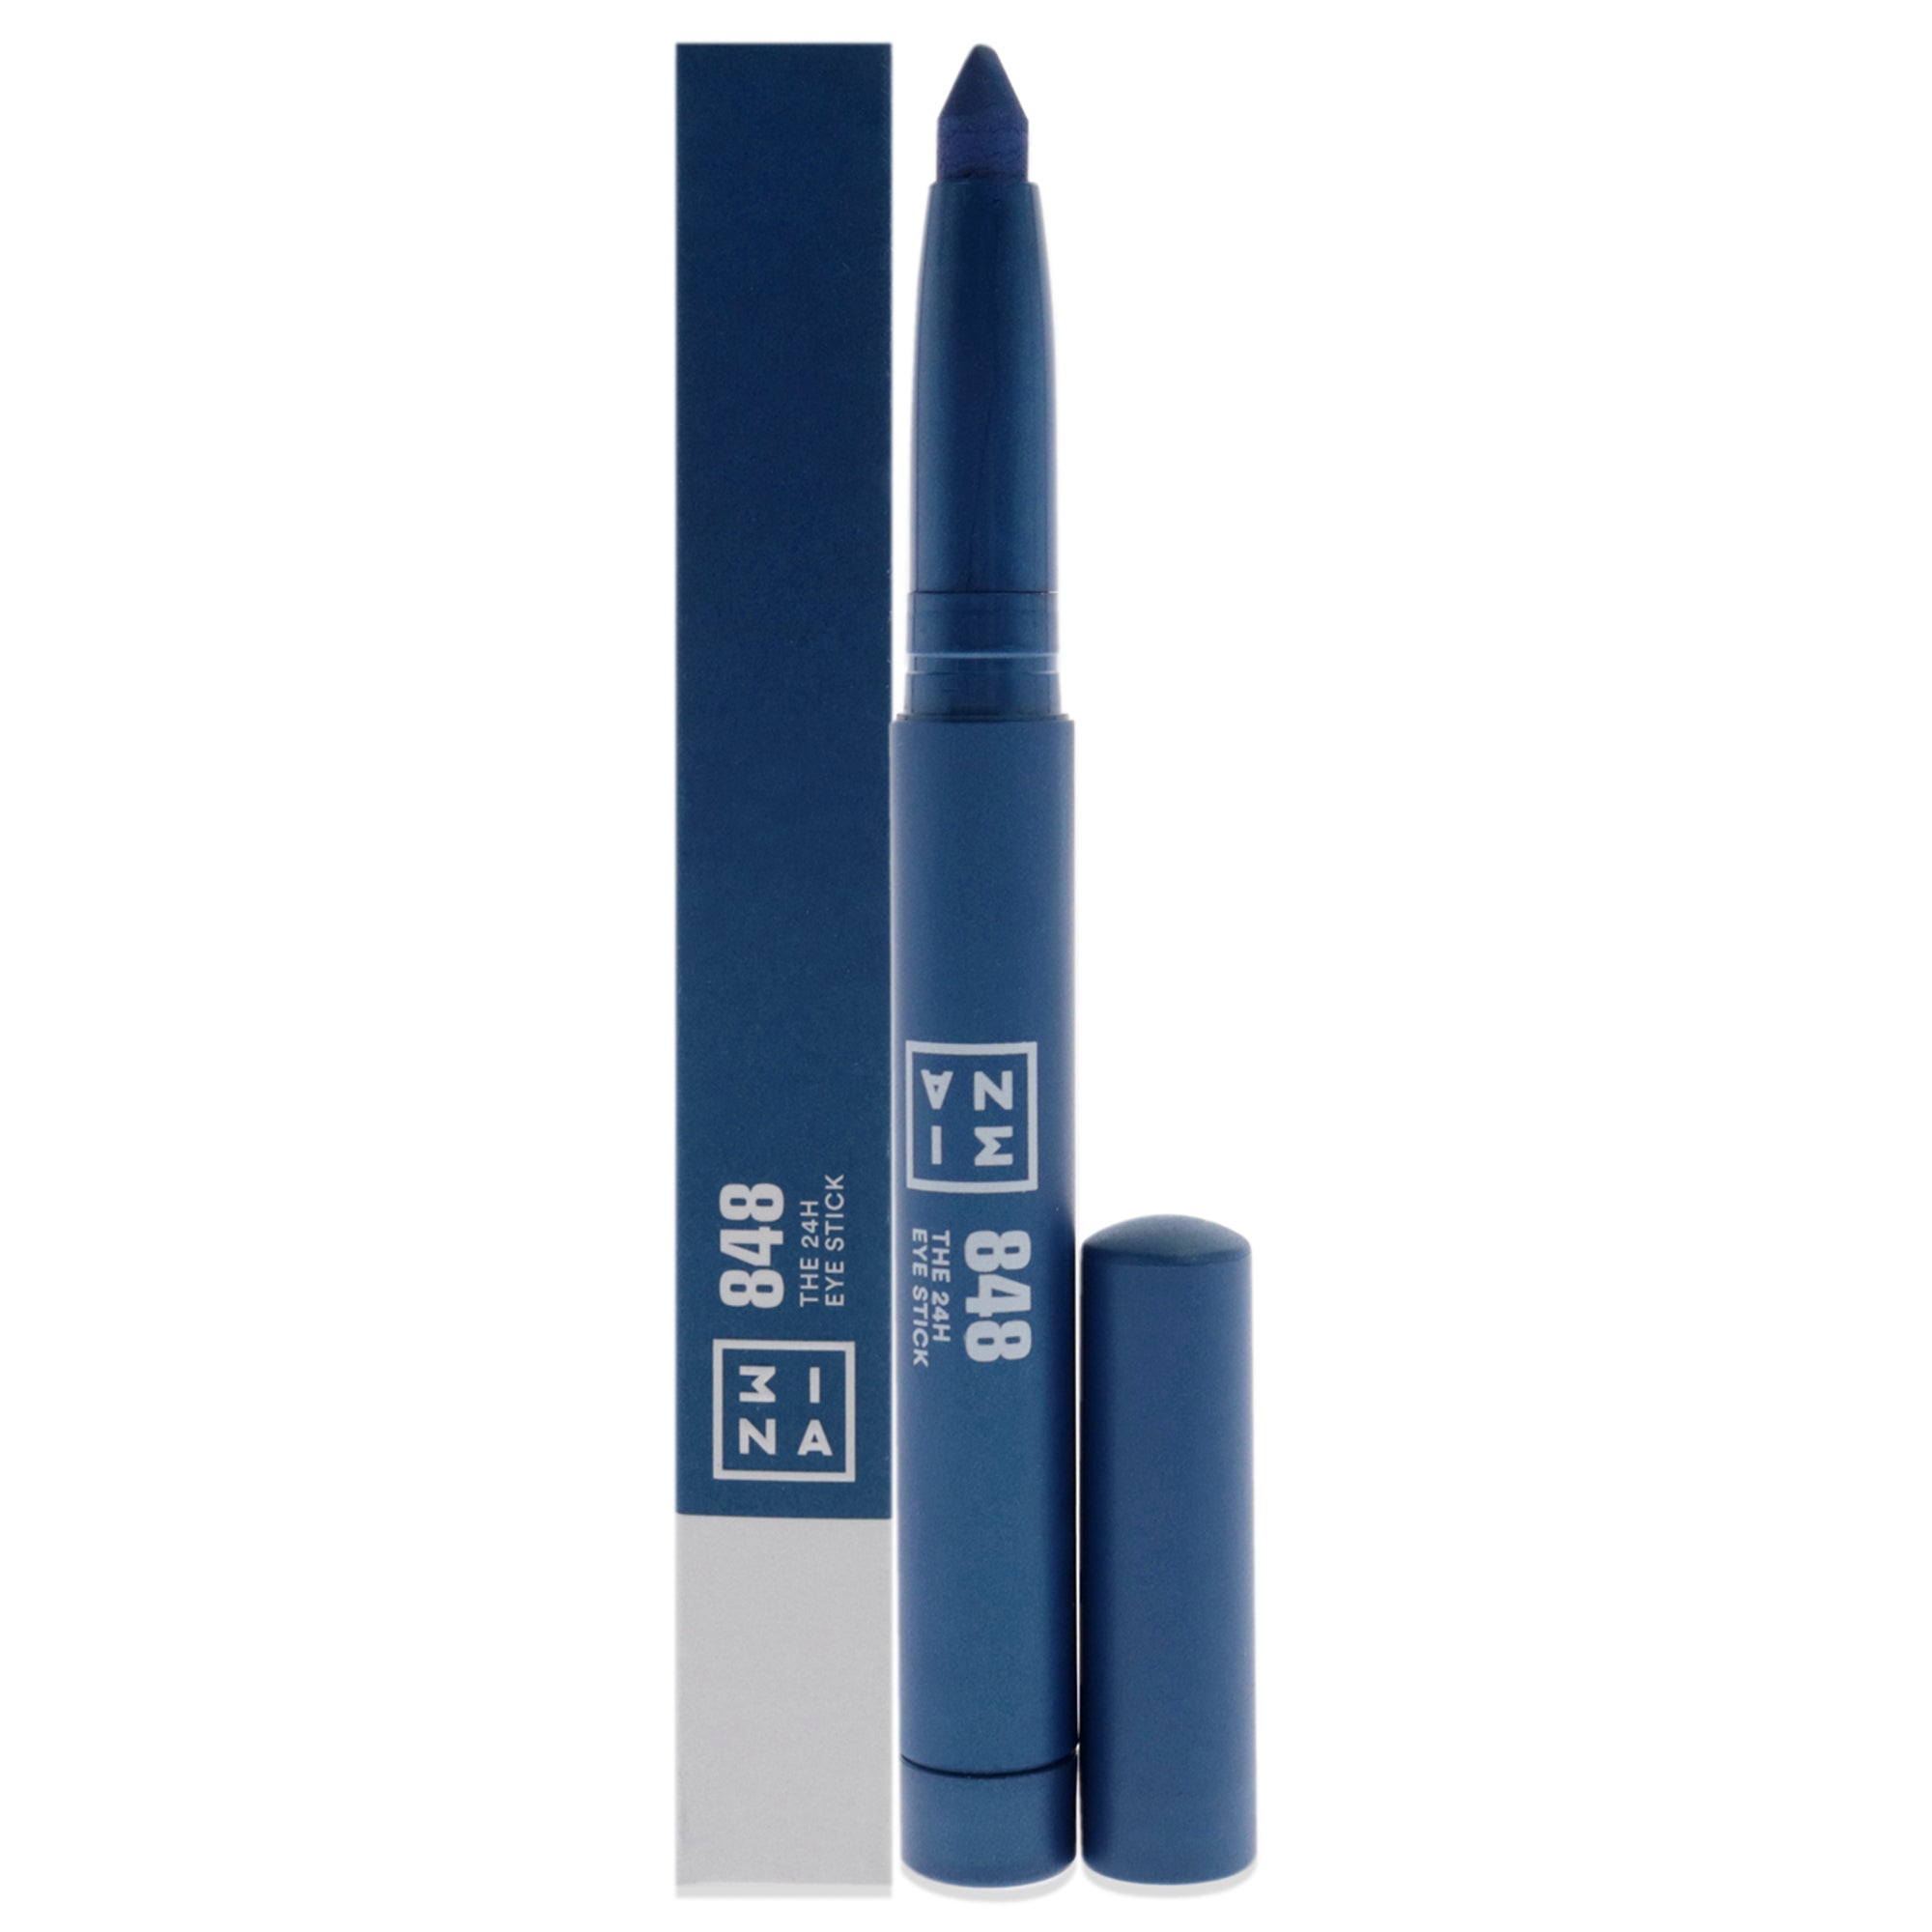 The 24H Eye Stick - 848 Light blue by 3Ina for Women - 0.049 oz Eye Shadow